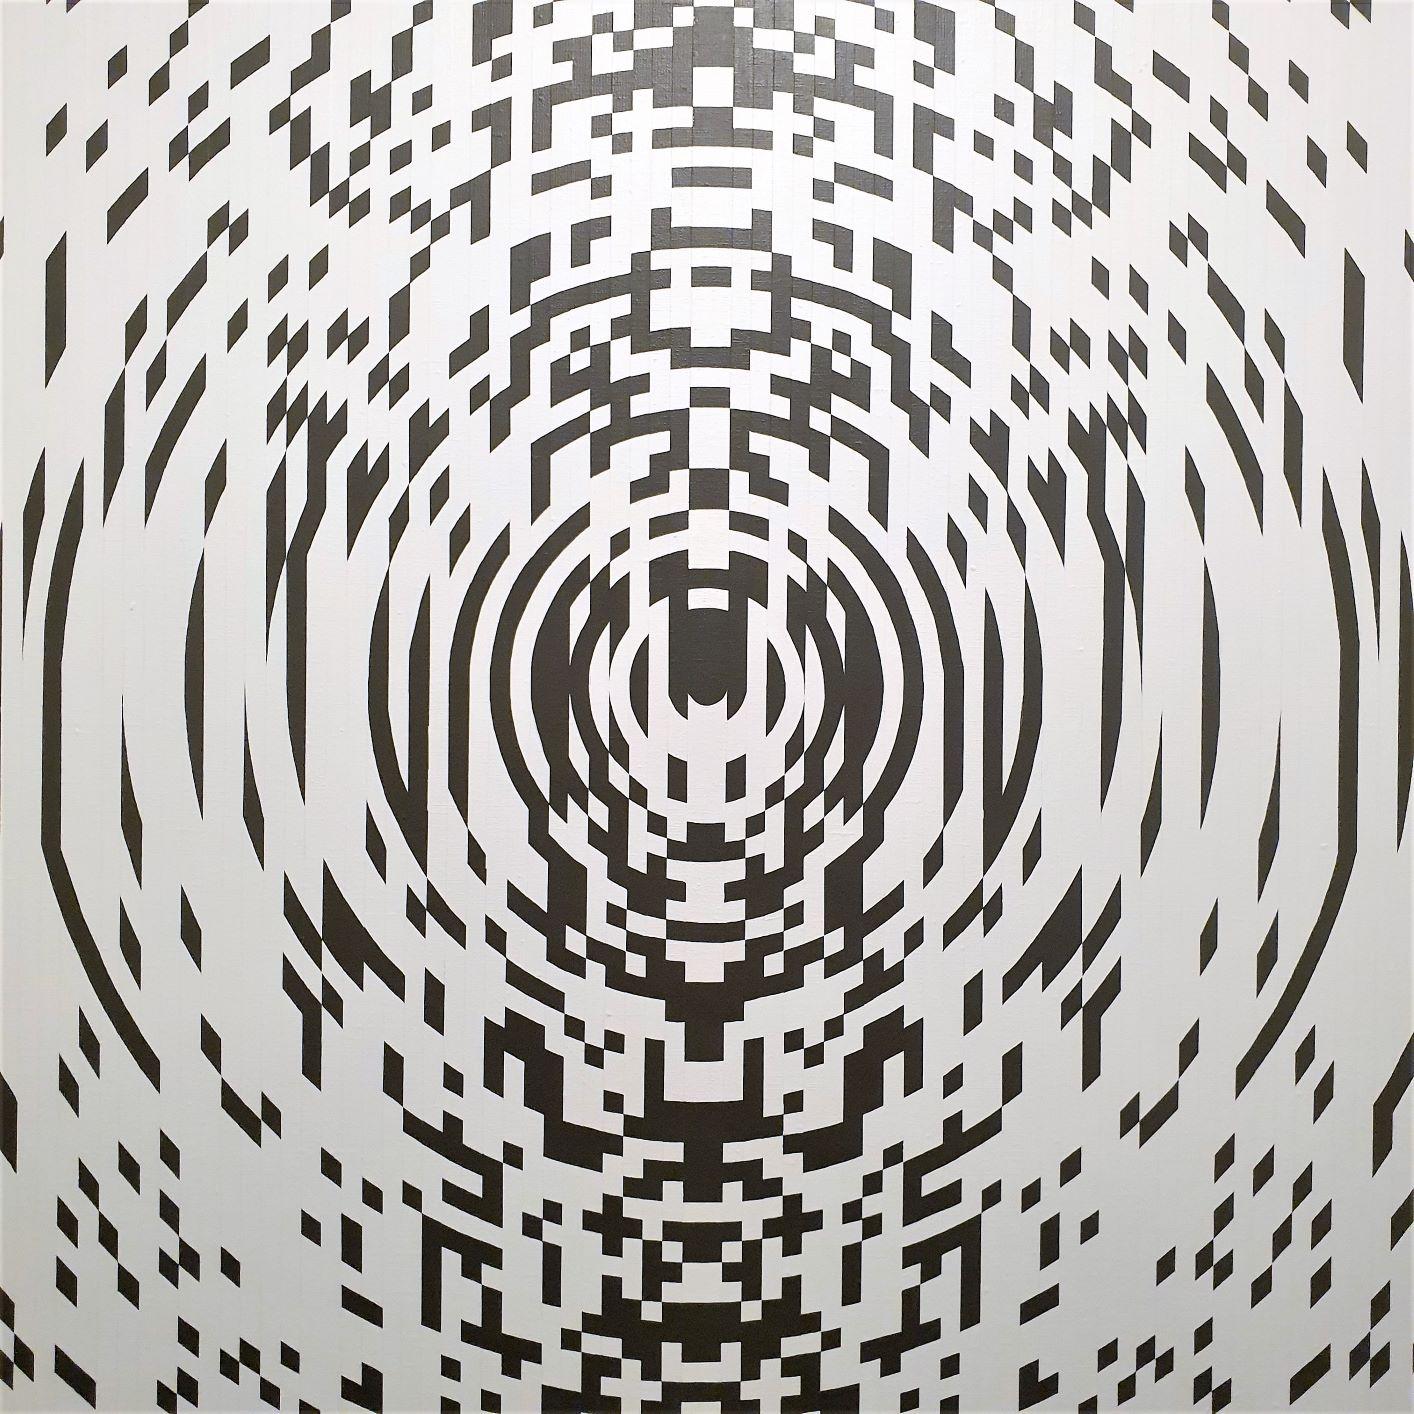 Fragmentation is a unique contemporary modern painting by renowned Polish-Dutch artist Eliza Kopec. The painting is a typical example of her preferred minimalist abstract geometric vocabulary. The black and white expanding sound wave resembling